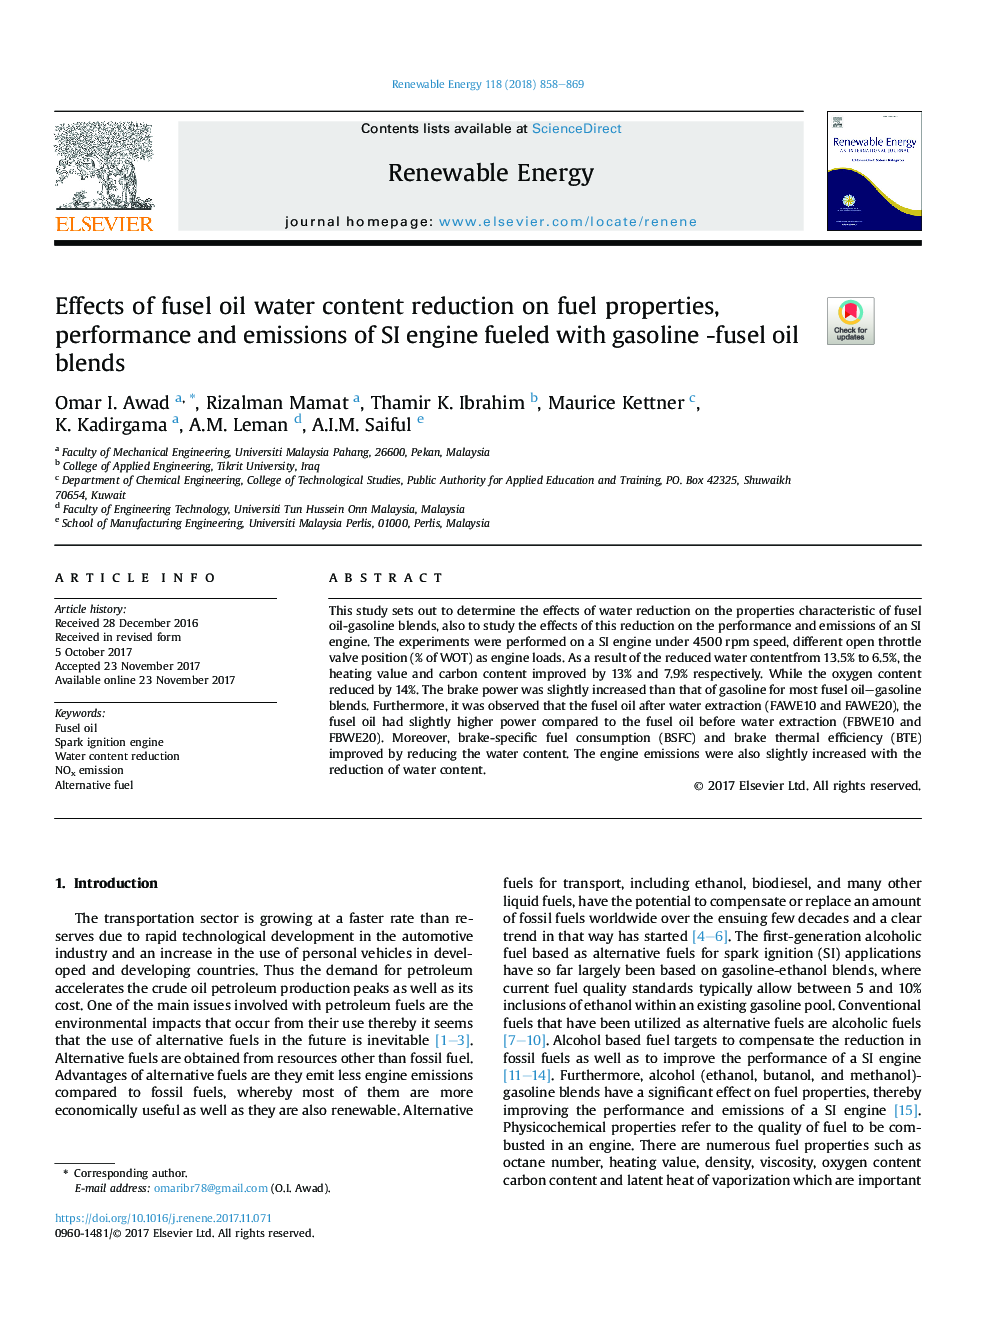 Effects of fusel oil water content reduction on fuel properties, performance and emissions of SI engine fueled with gasoline -fusel oil blends